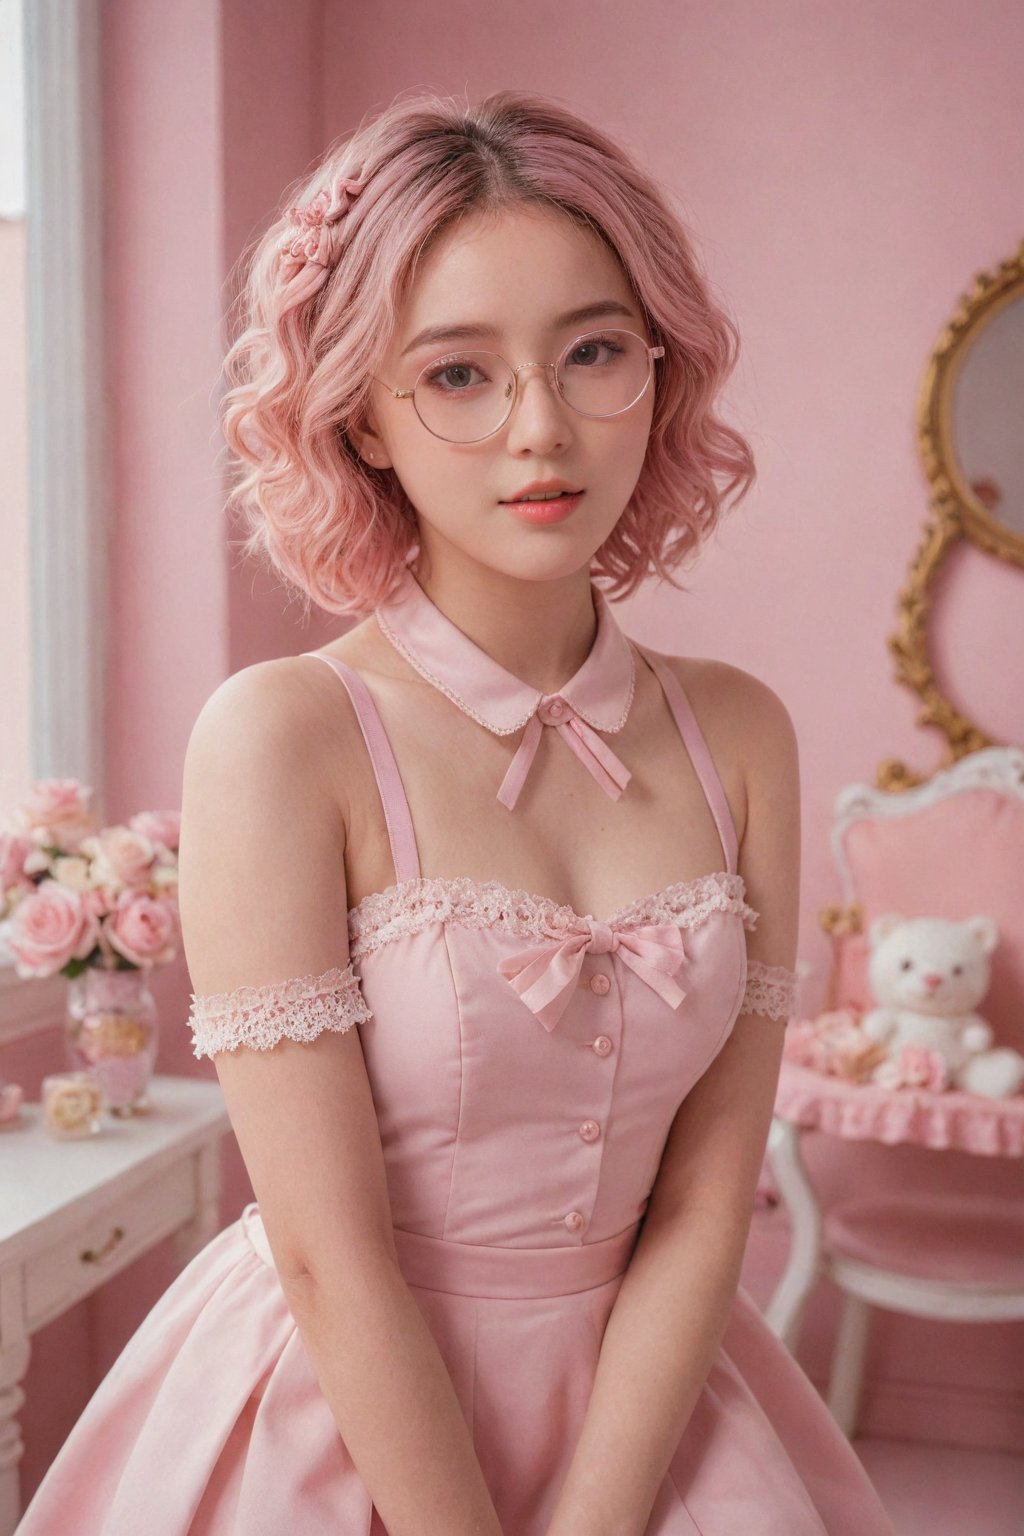 (masterpiece, cinematic, photorealistic, realistic details, dynamic light & pose, high quality, perfect lighting), More Reasonable Details, hubggirl, BREAK, A cheerful girl in a pink-themed outfit, surrounded by a pastel pink room filled with cute decorations, her pink hair styled in short curls, round glasses